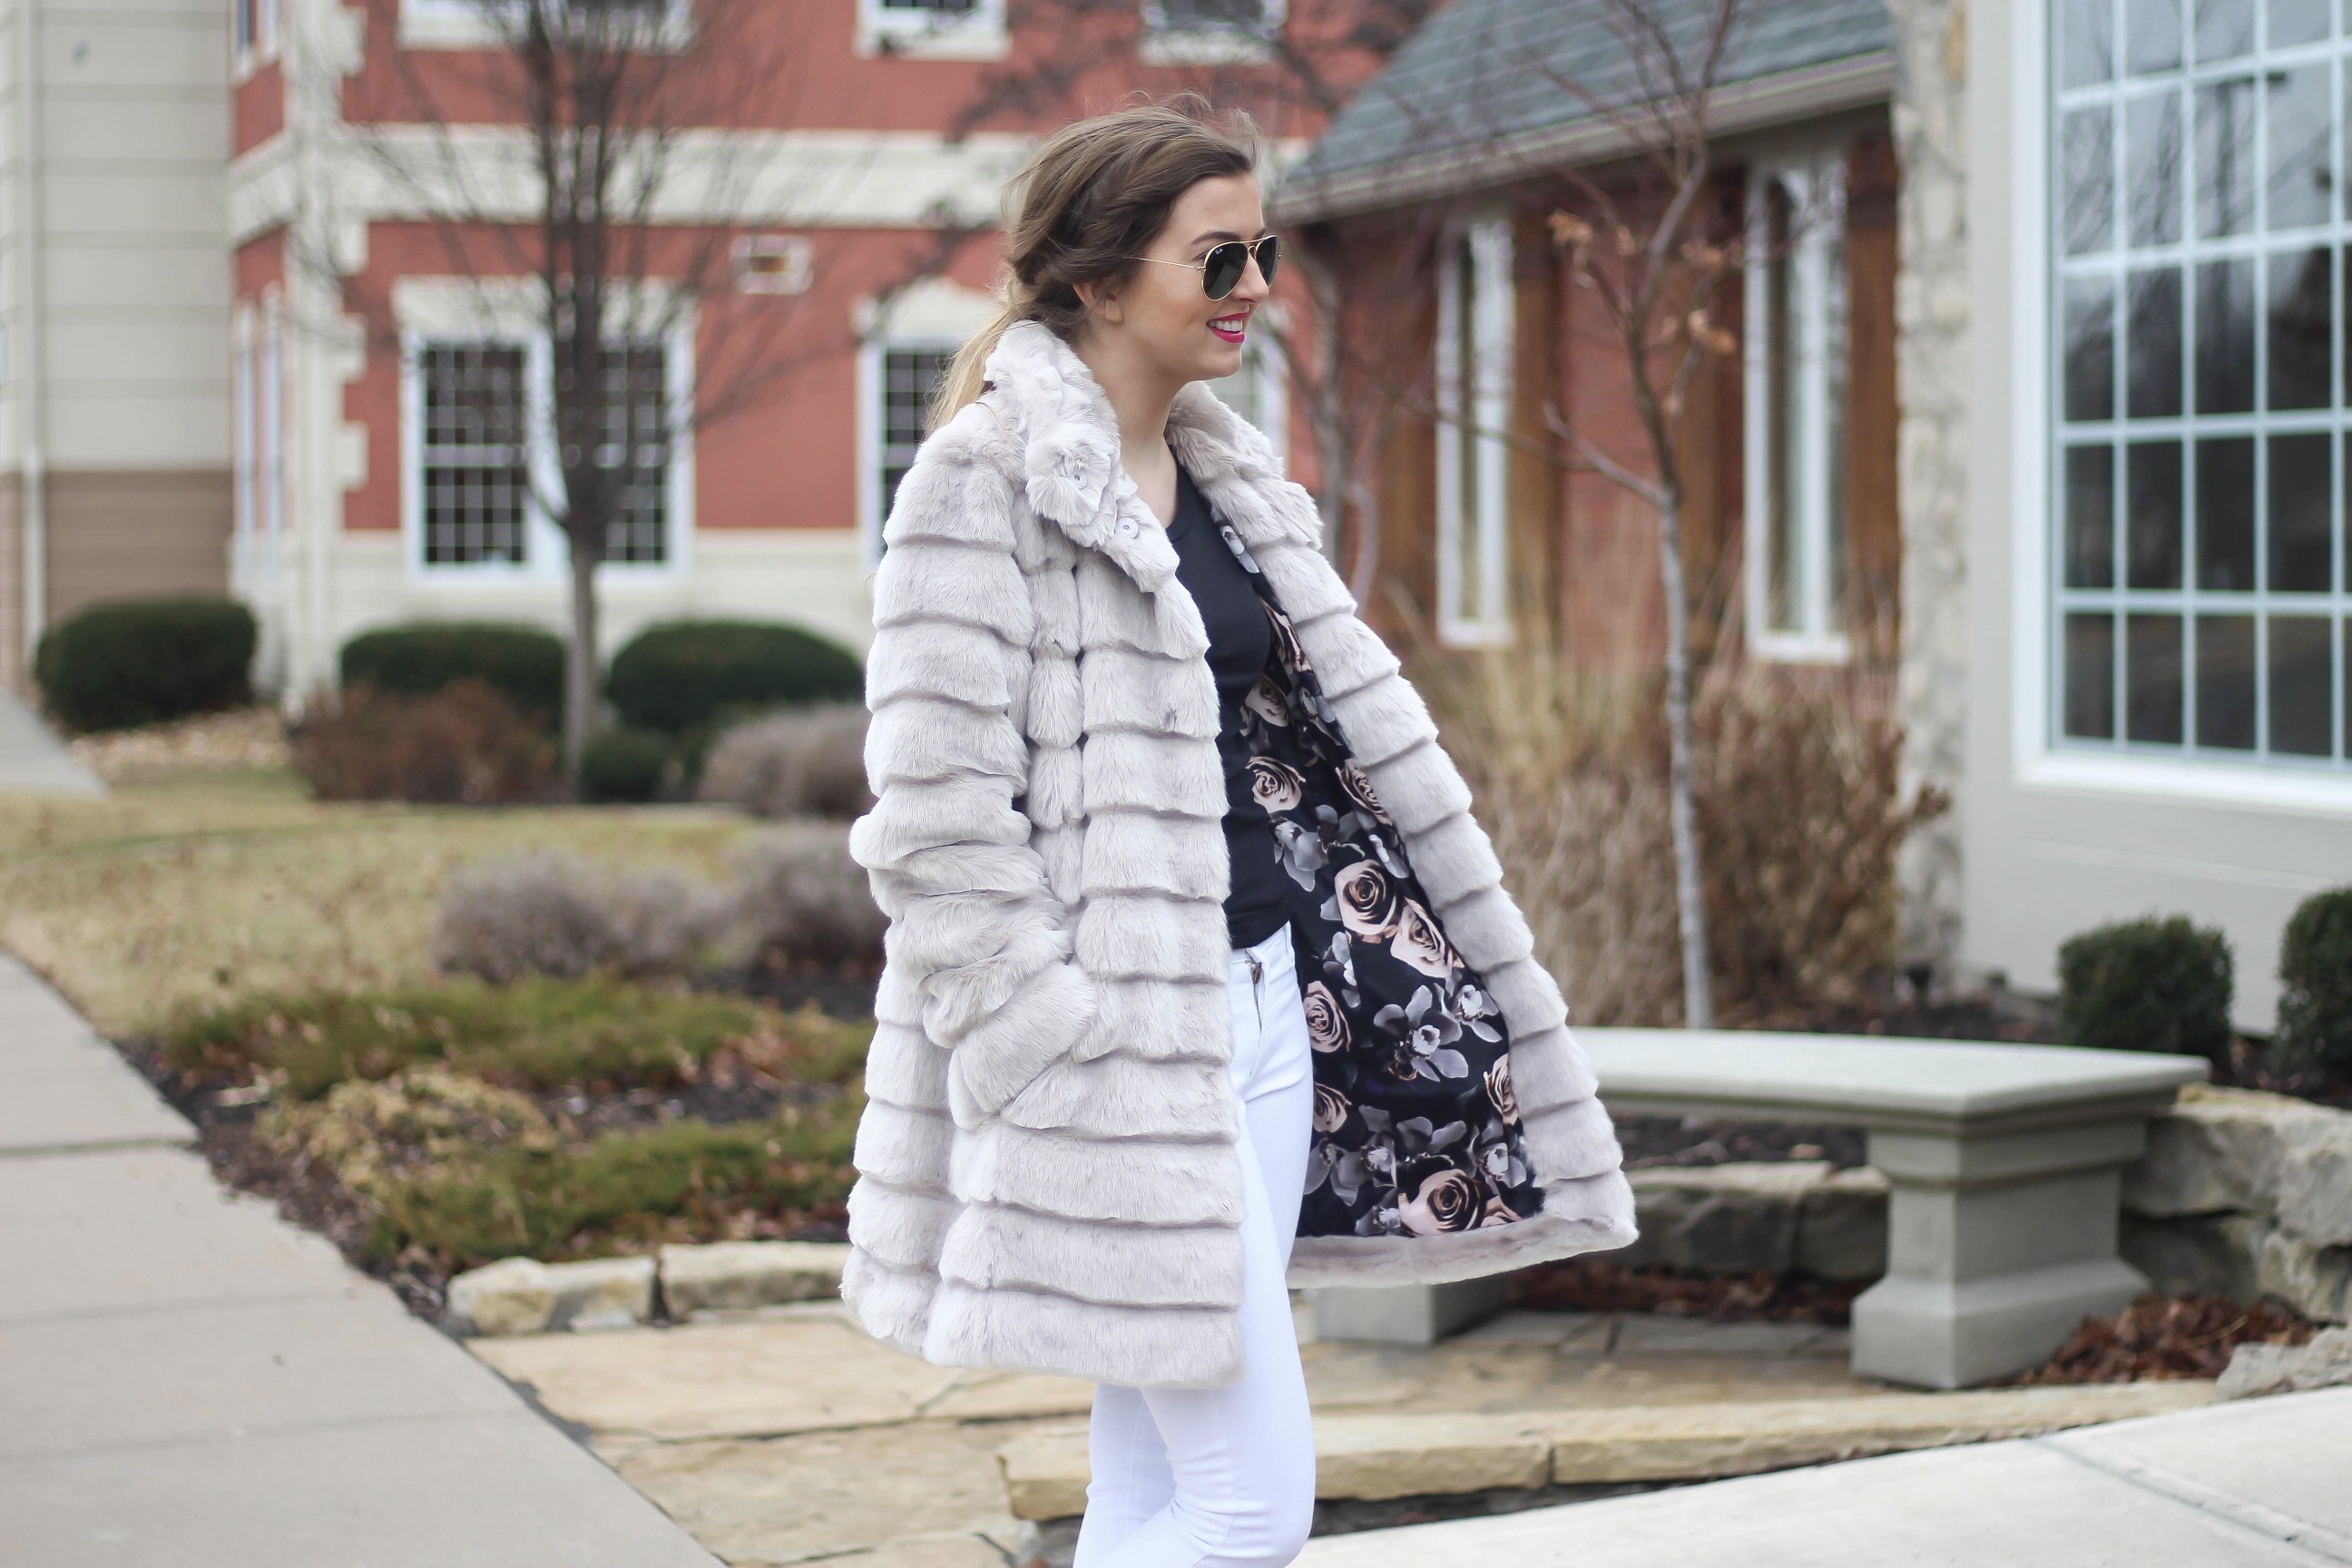 Fur coats are a closet necessity! This faux fur coat is my favorite and look adorable with white pants, cute heels, and bright pink lips! By Lauren Lindmark on dailydoseofcharm.com daily dose of charm